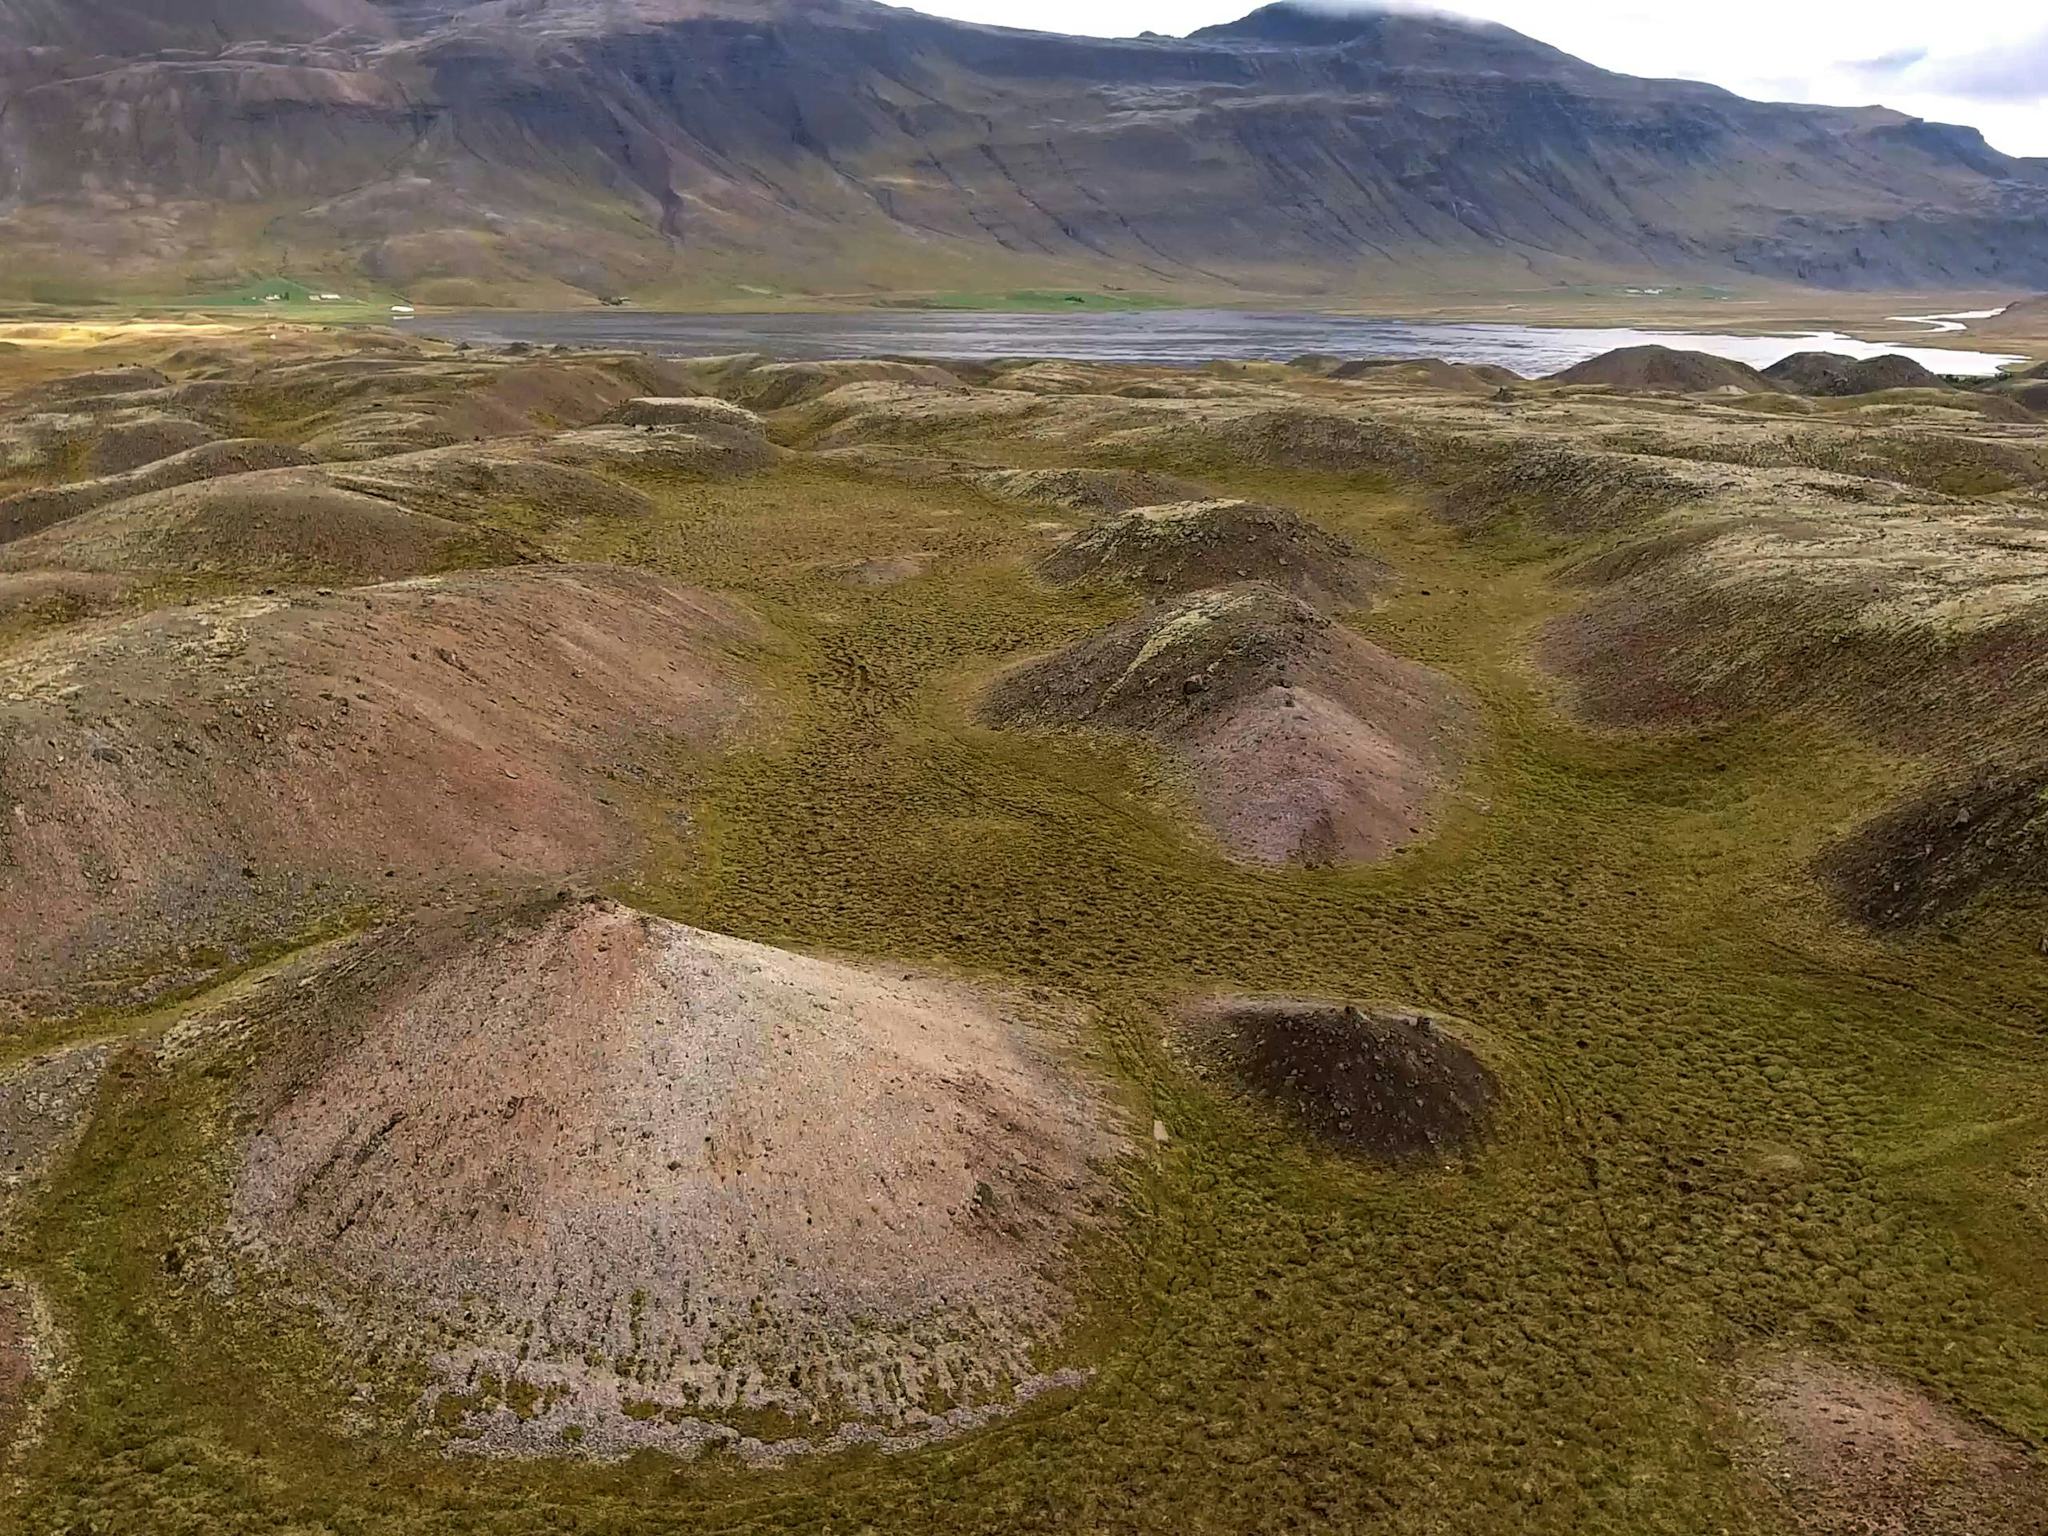 Rugged landscape with moss covered volcanic mounds in the foreground